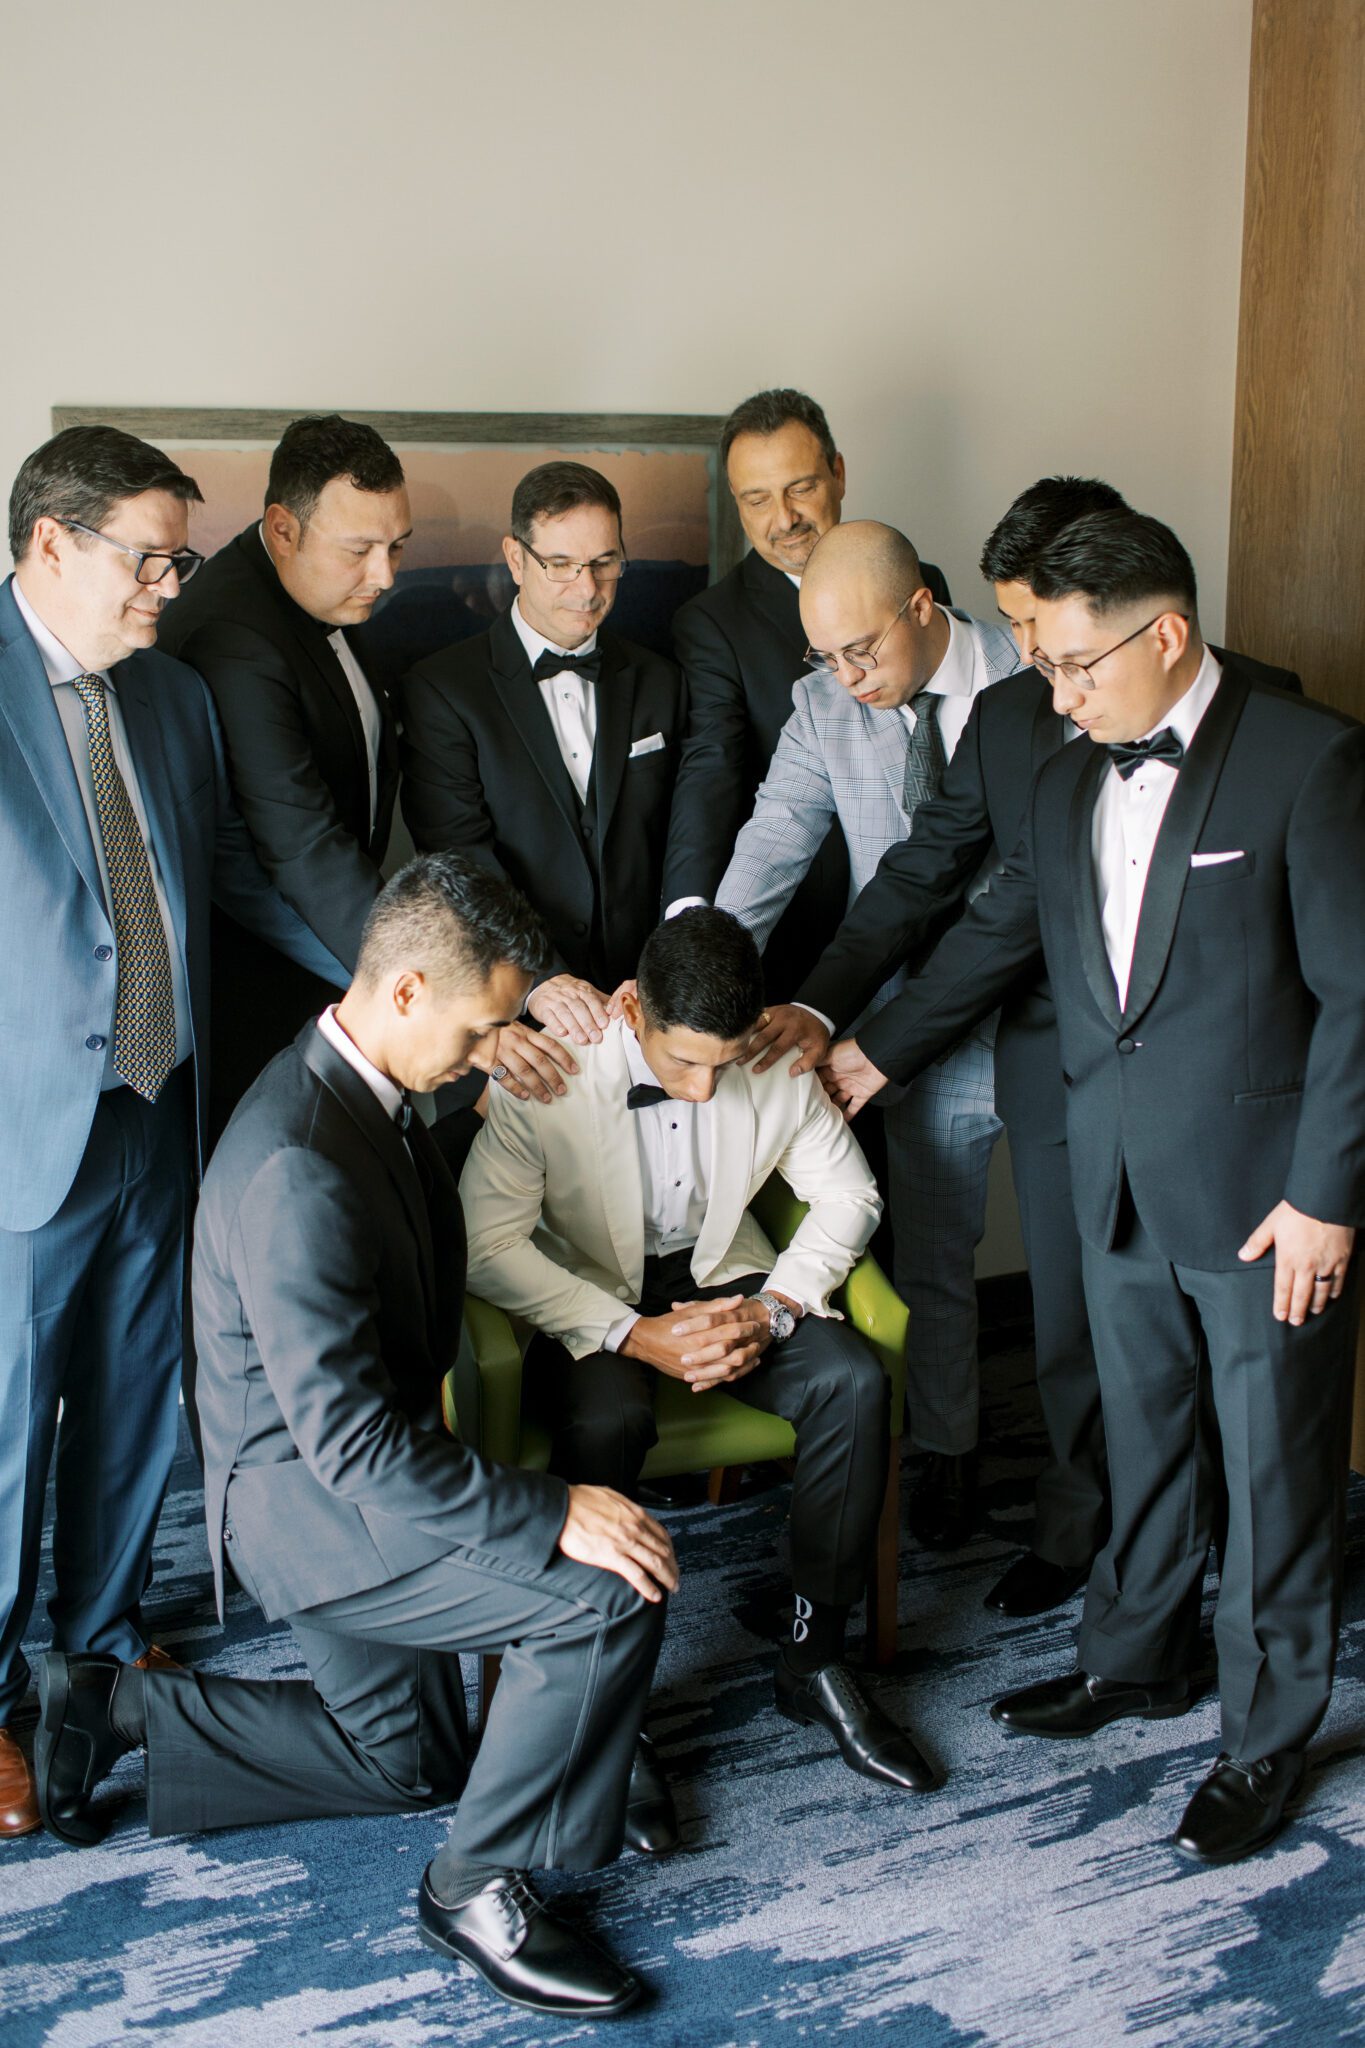 Groom surrounded by groomsmen and parents praying together on wedding day.